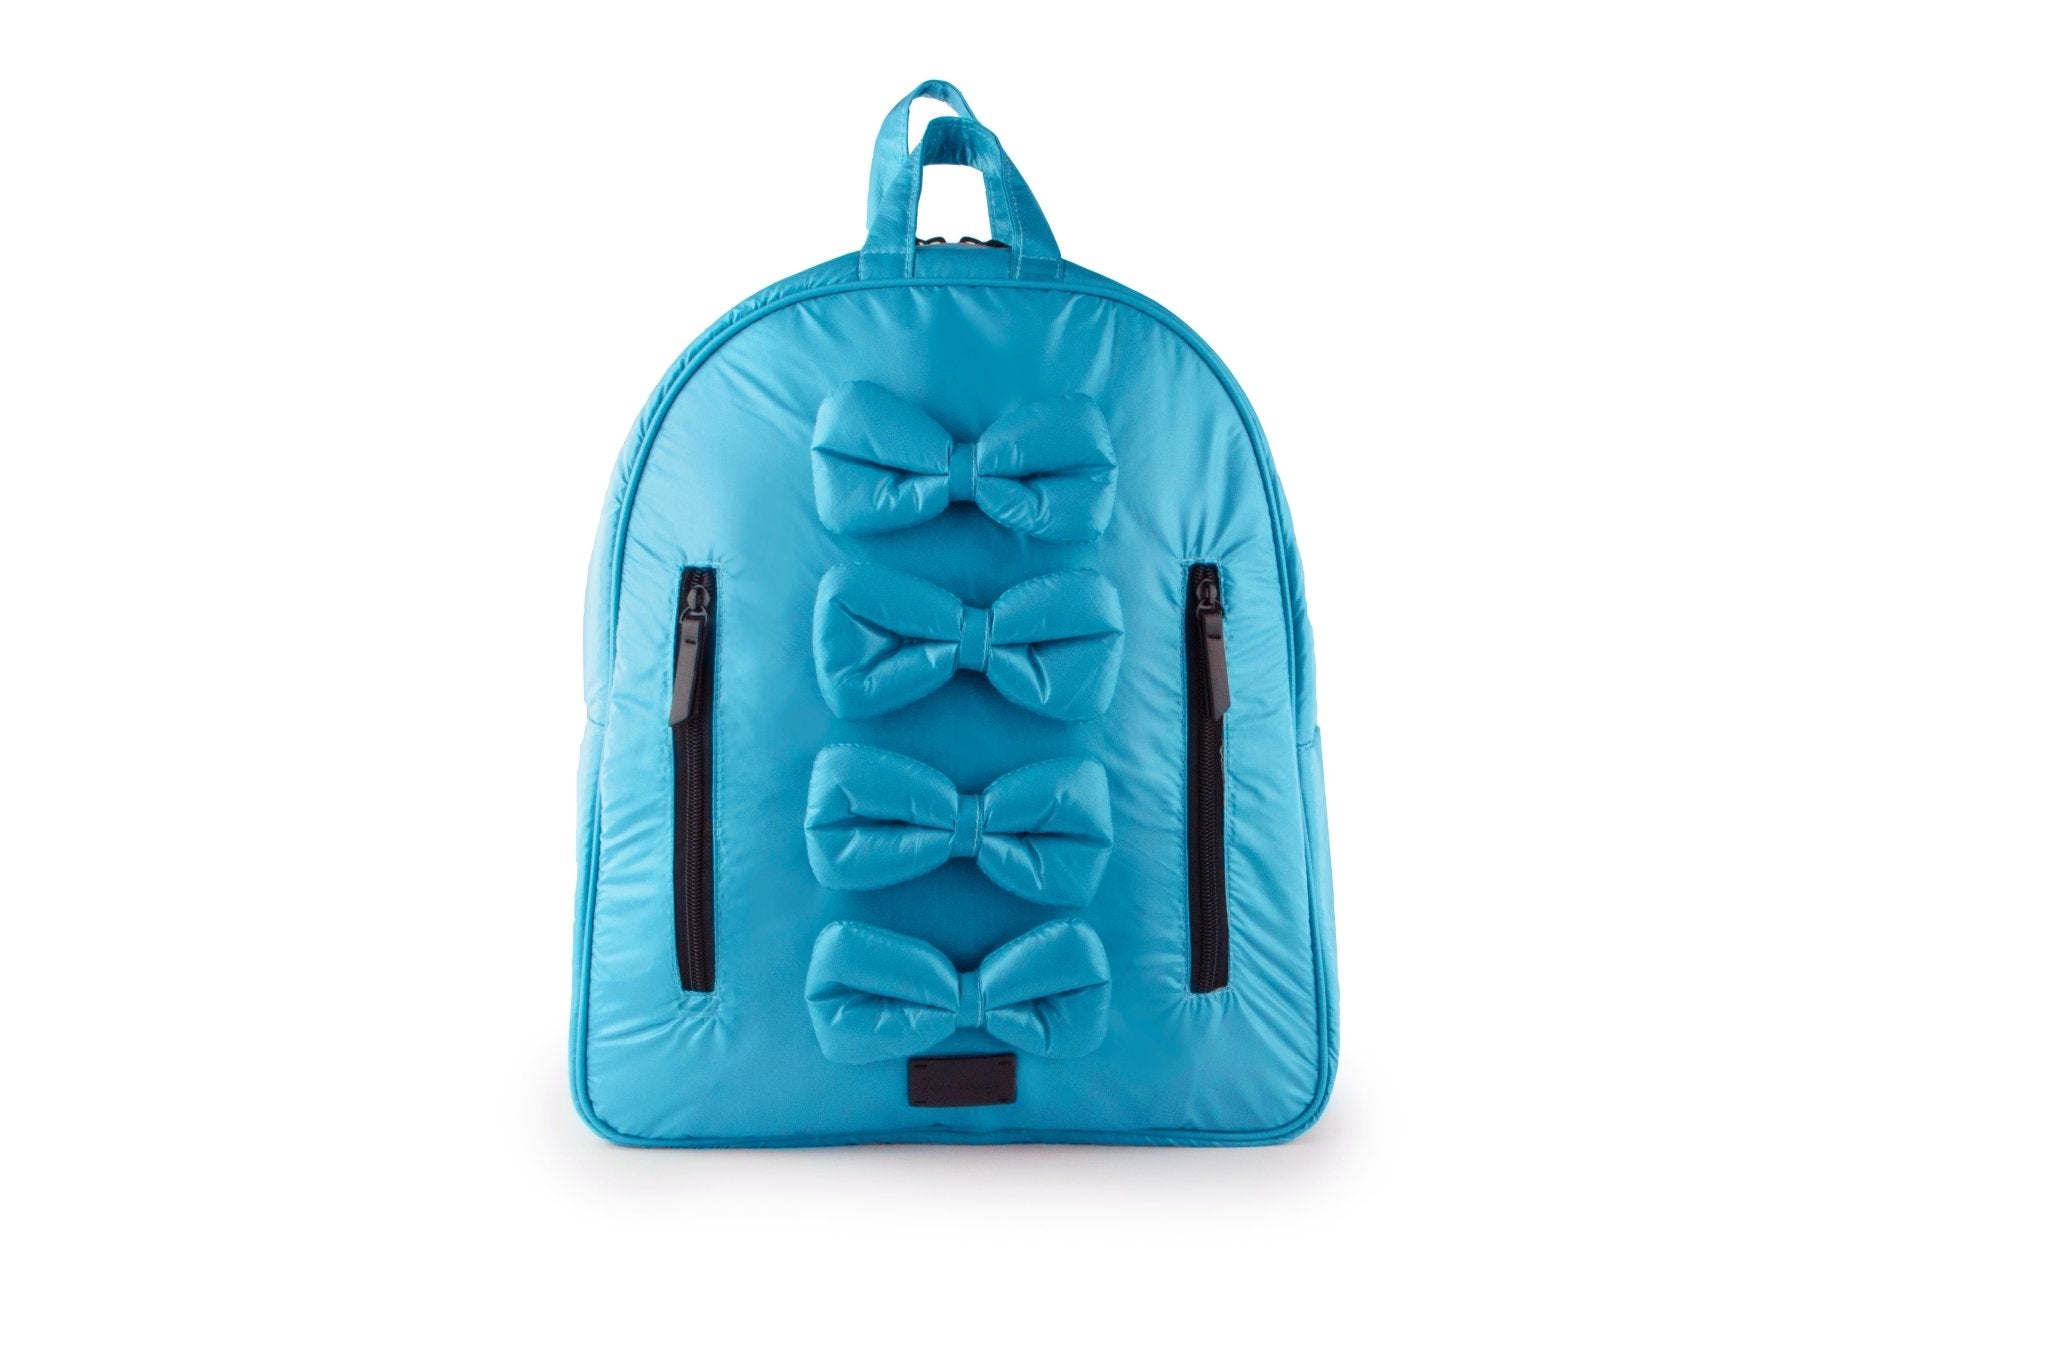 7 AM Voyage Mini Bows Backpack - ANB Baby -$20 - $50